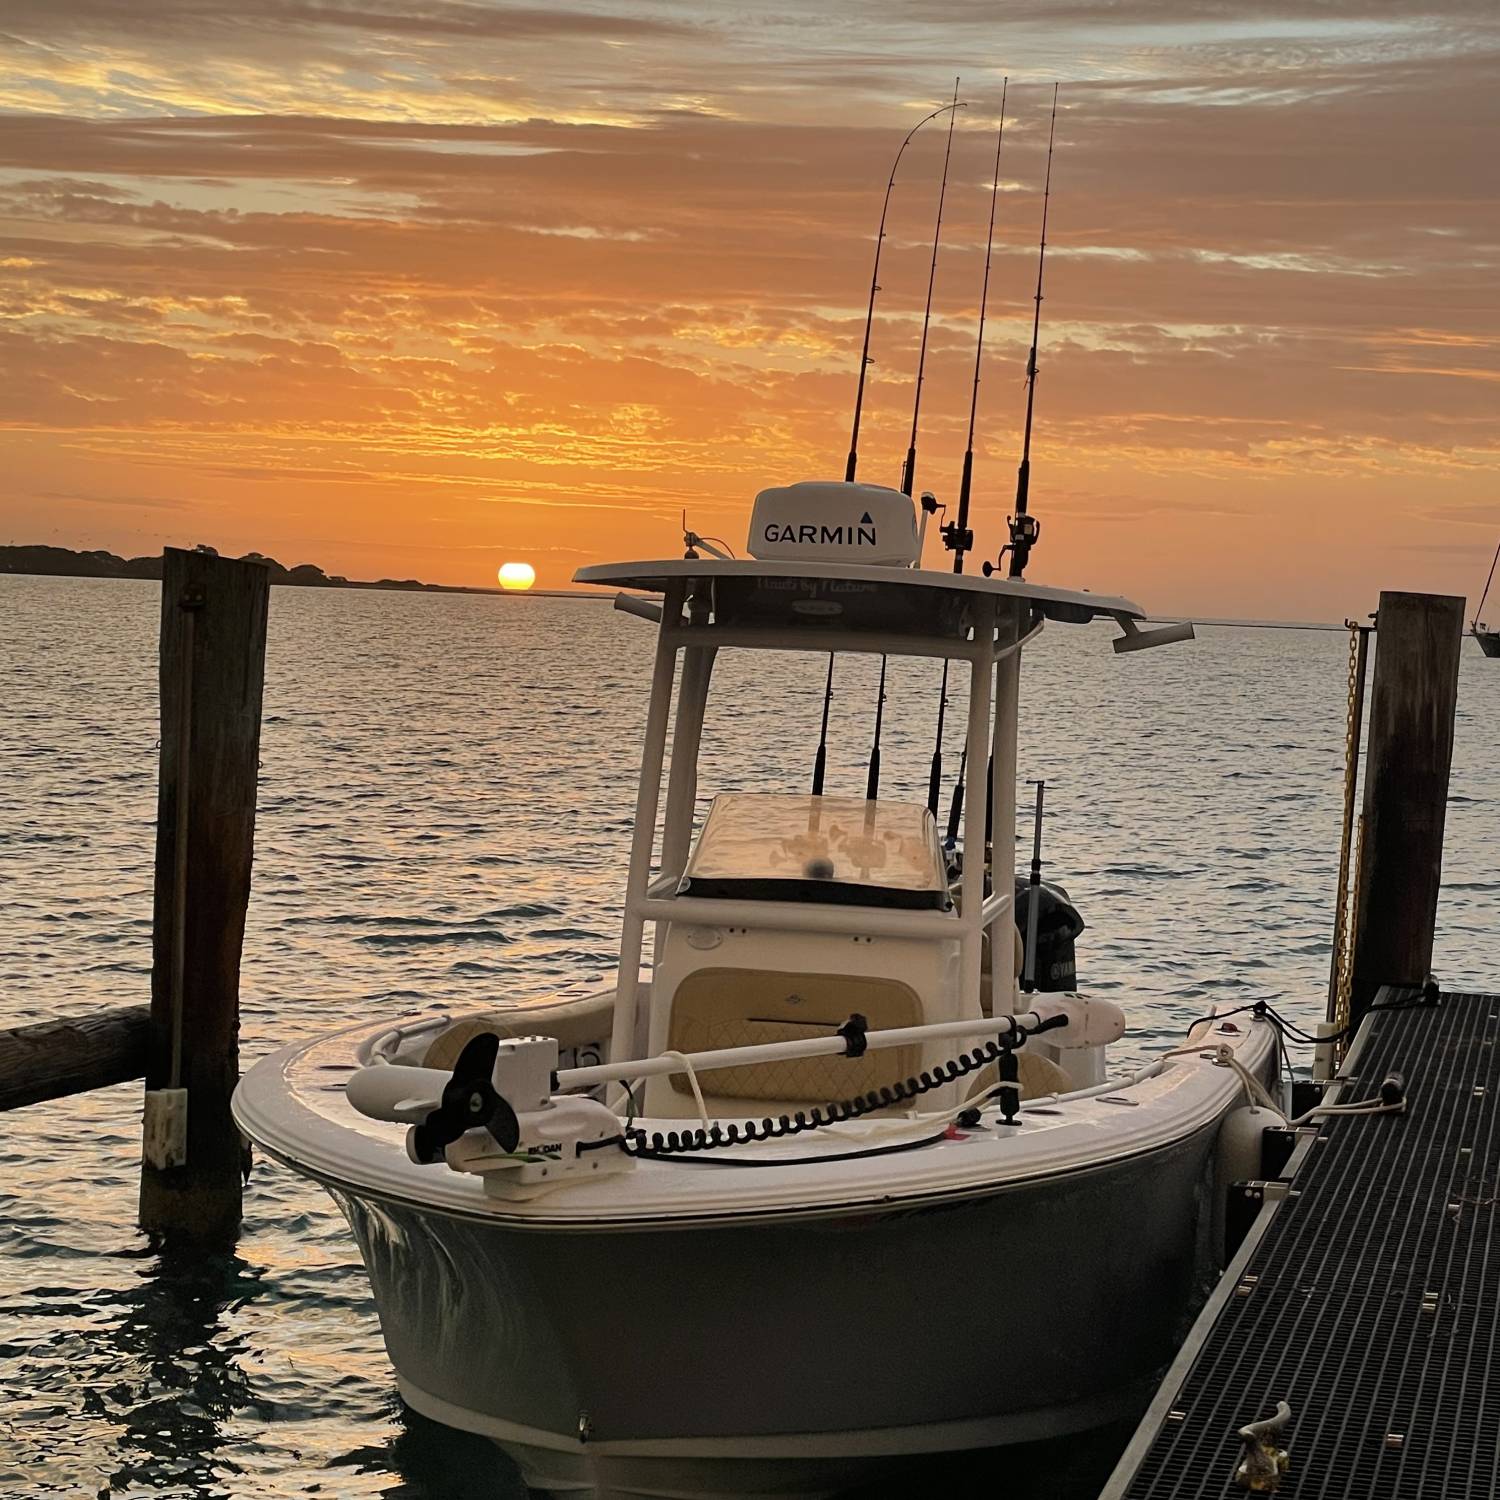 Title: Chasing Sunsets - On board their Sportsman Open 232 Center Console - Location: Dry Tortugas Ft. Jefferson. Participating in the Photo Contest #SportsmanApril